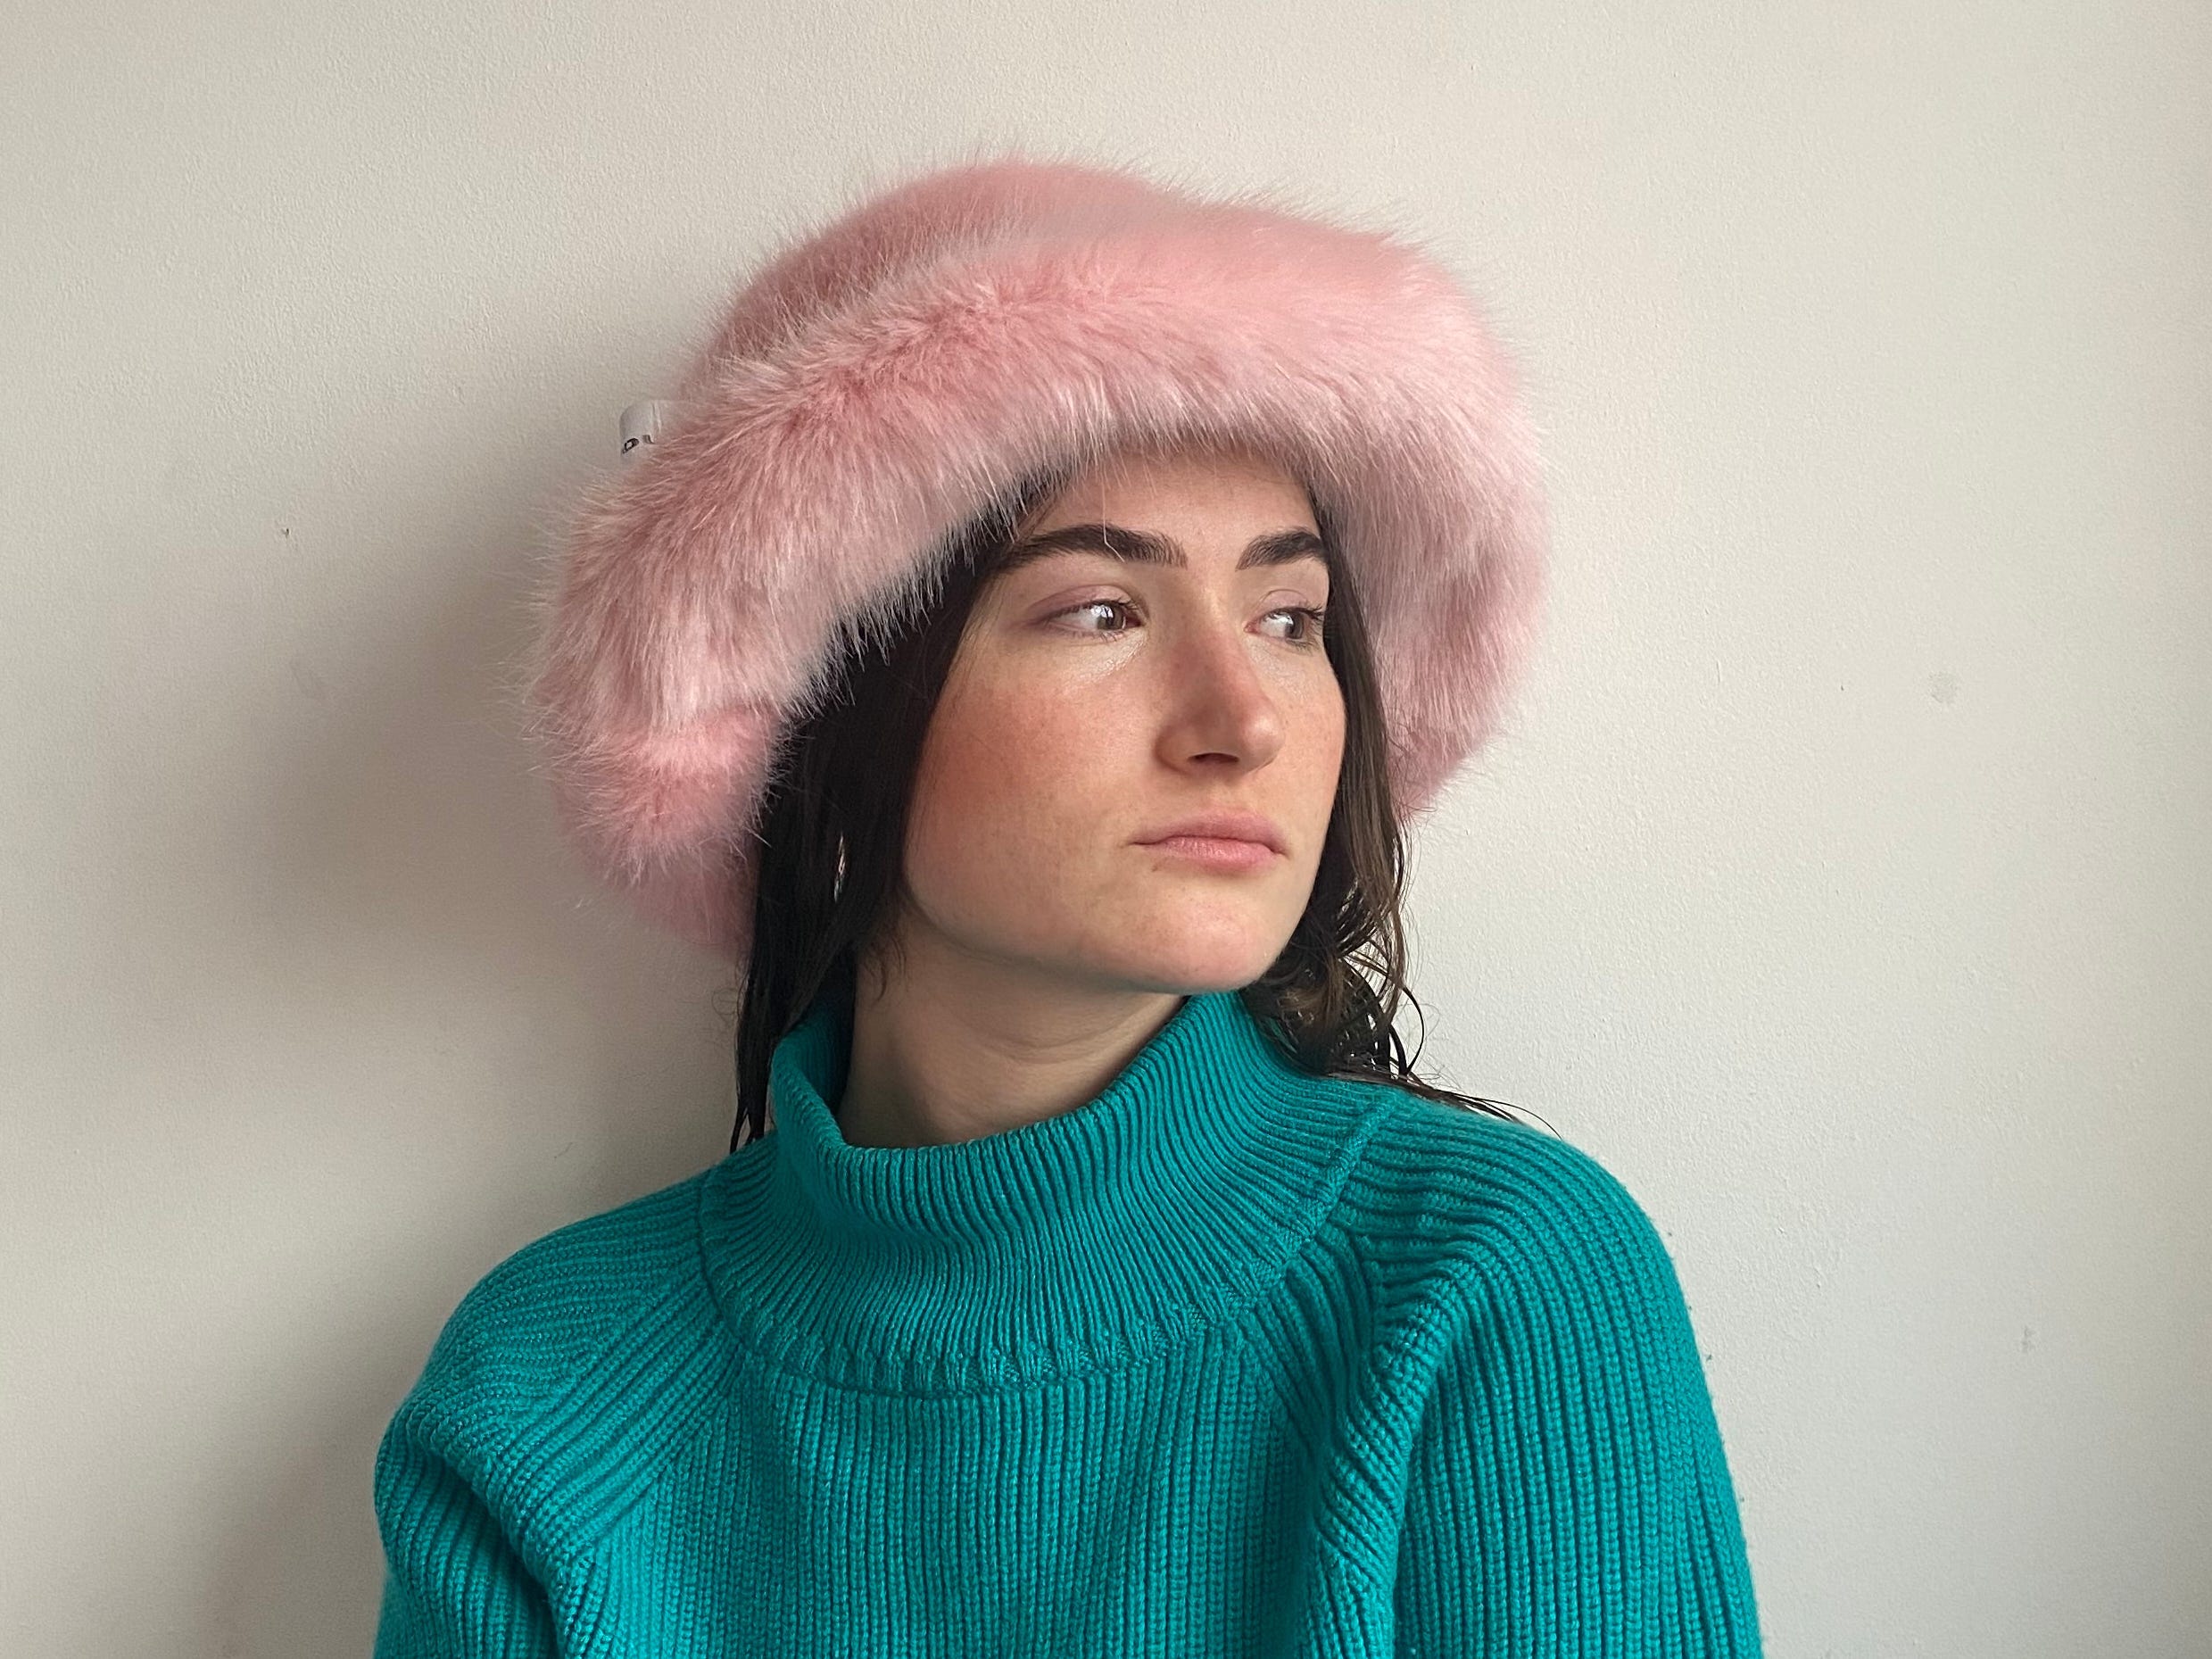 Ashleigh Dickinson confectioned this fluffy pink hat.